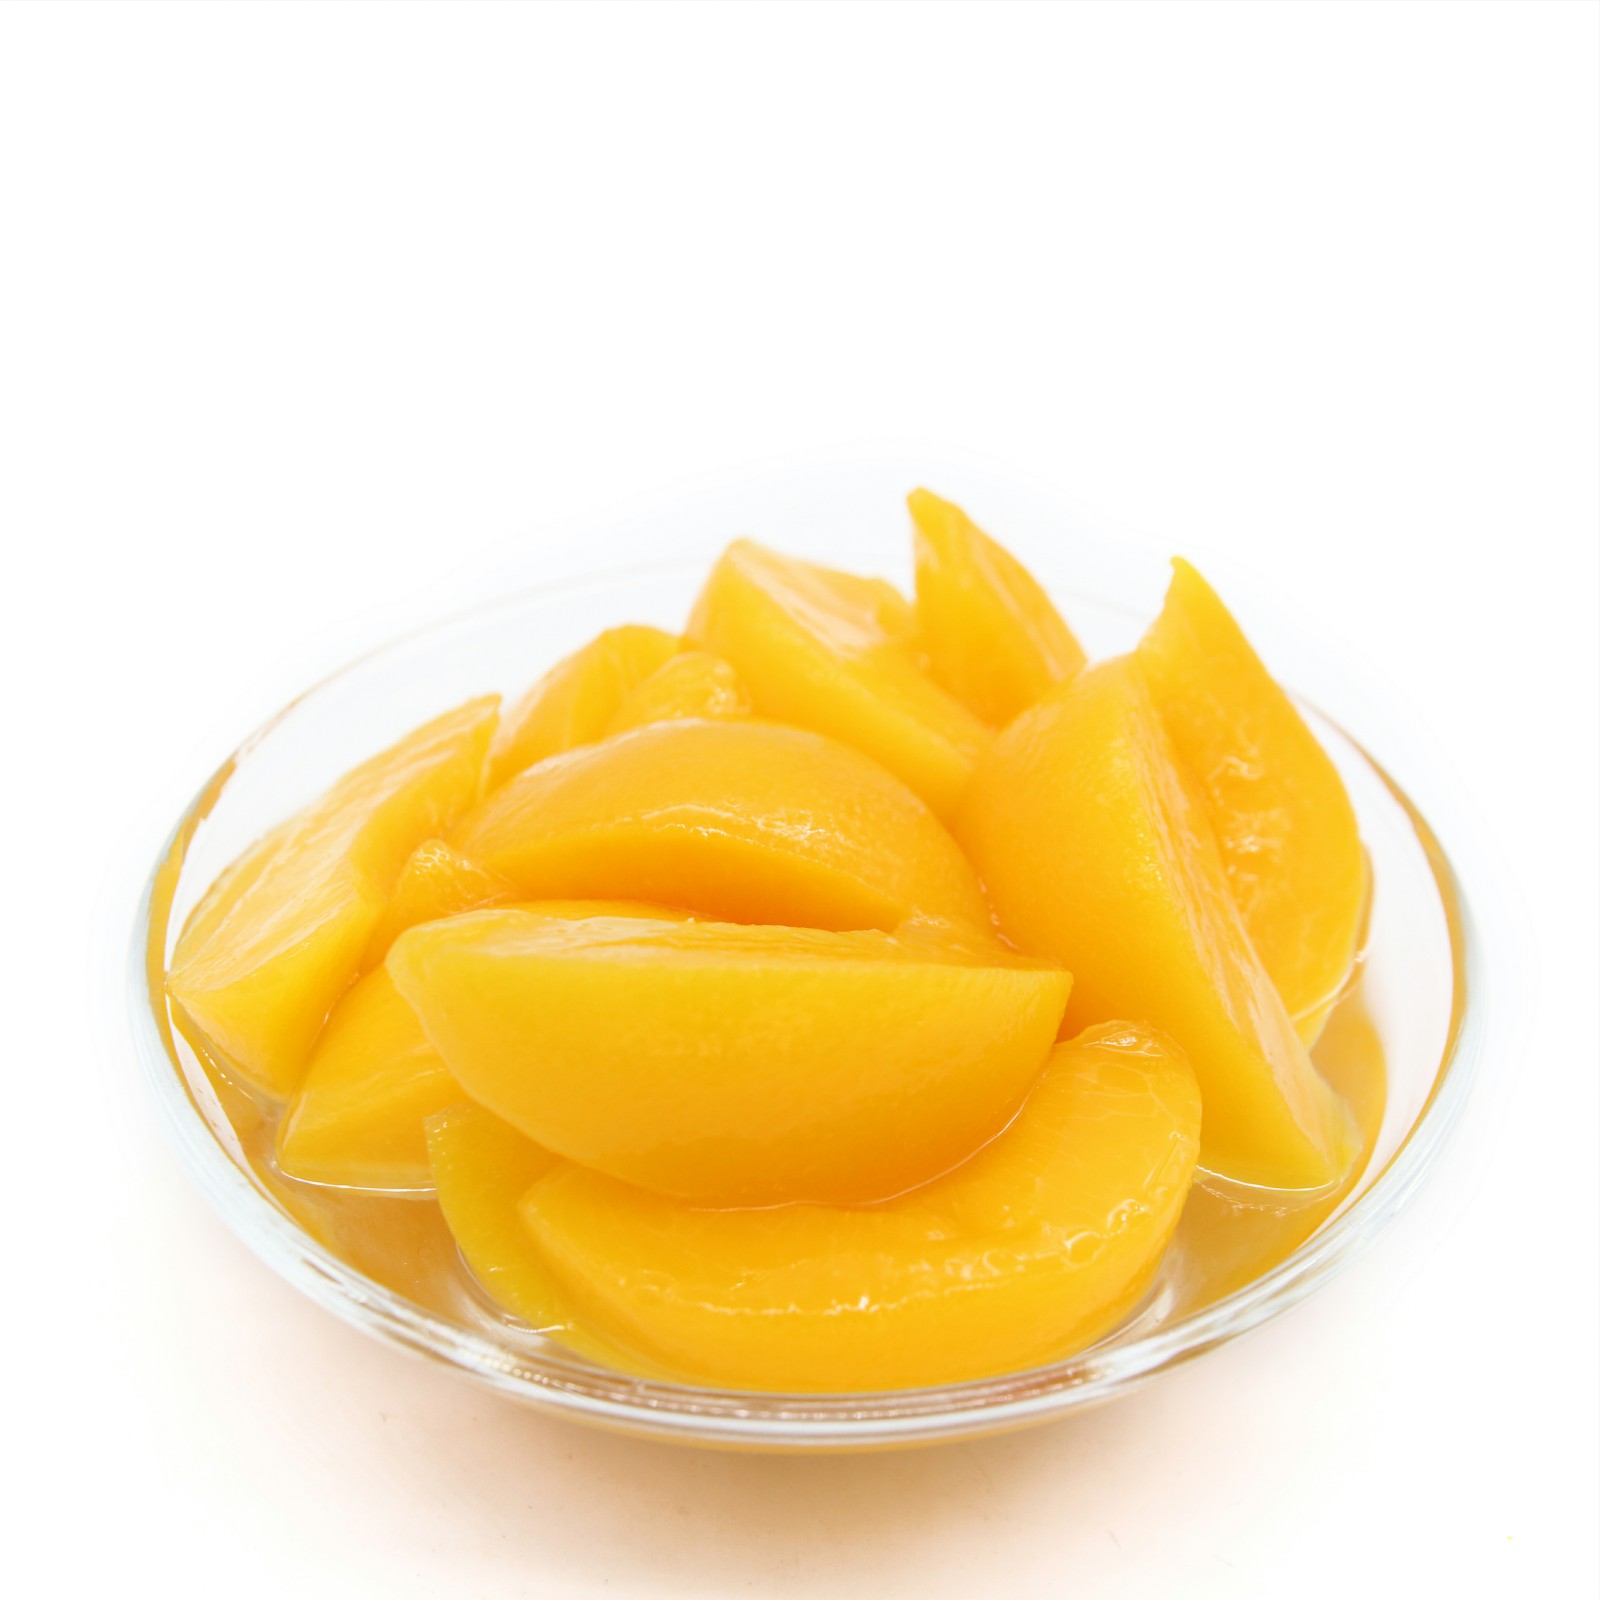 Canned yellow peach slice